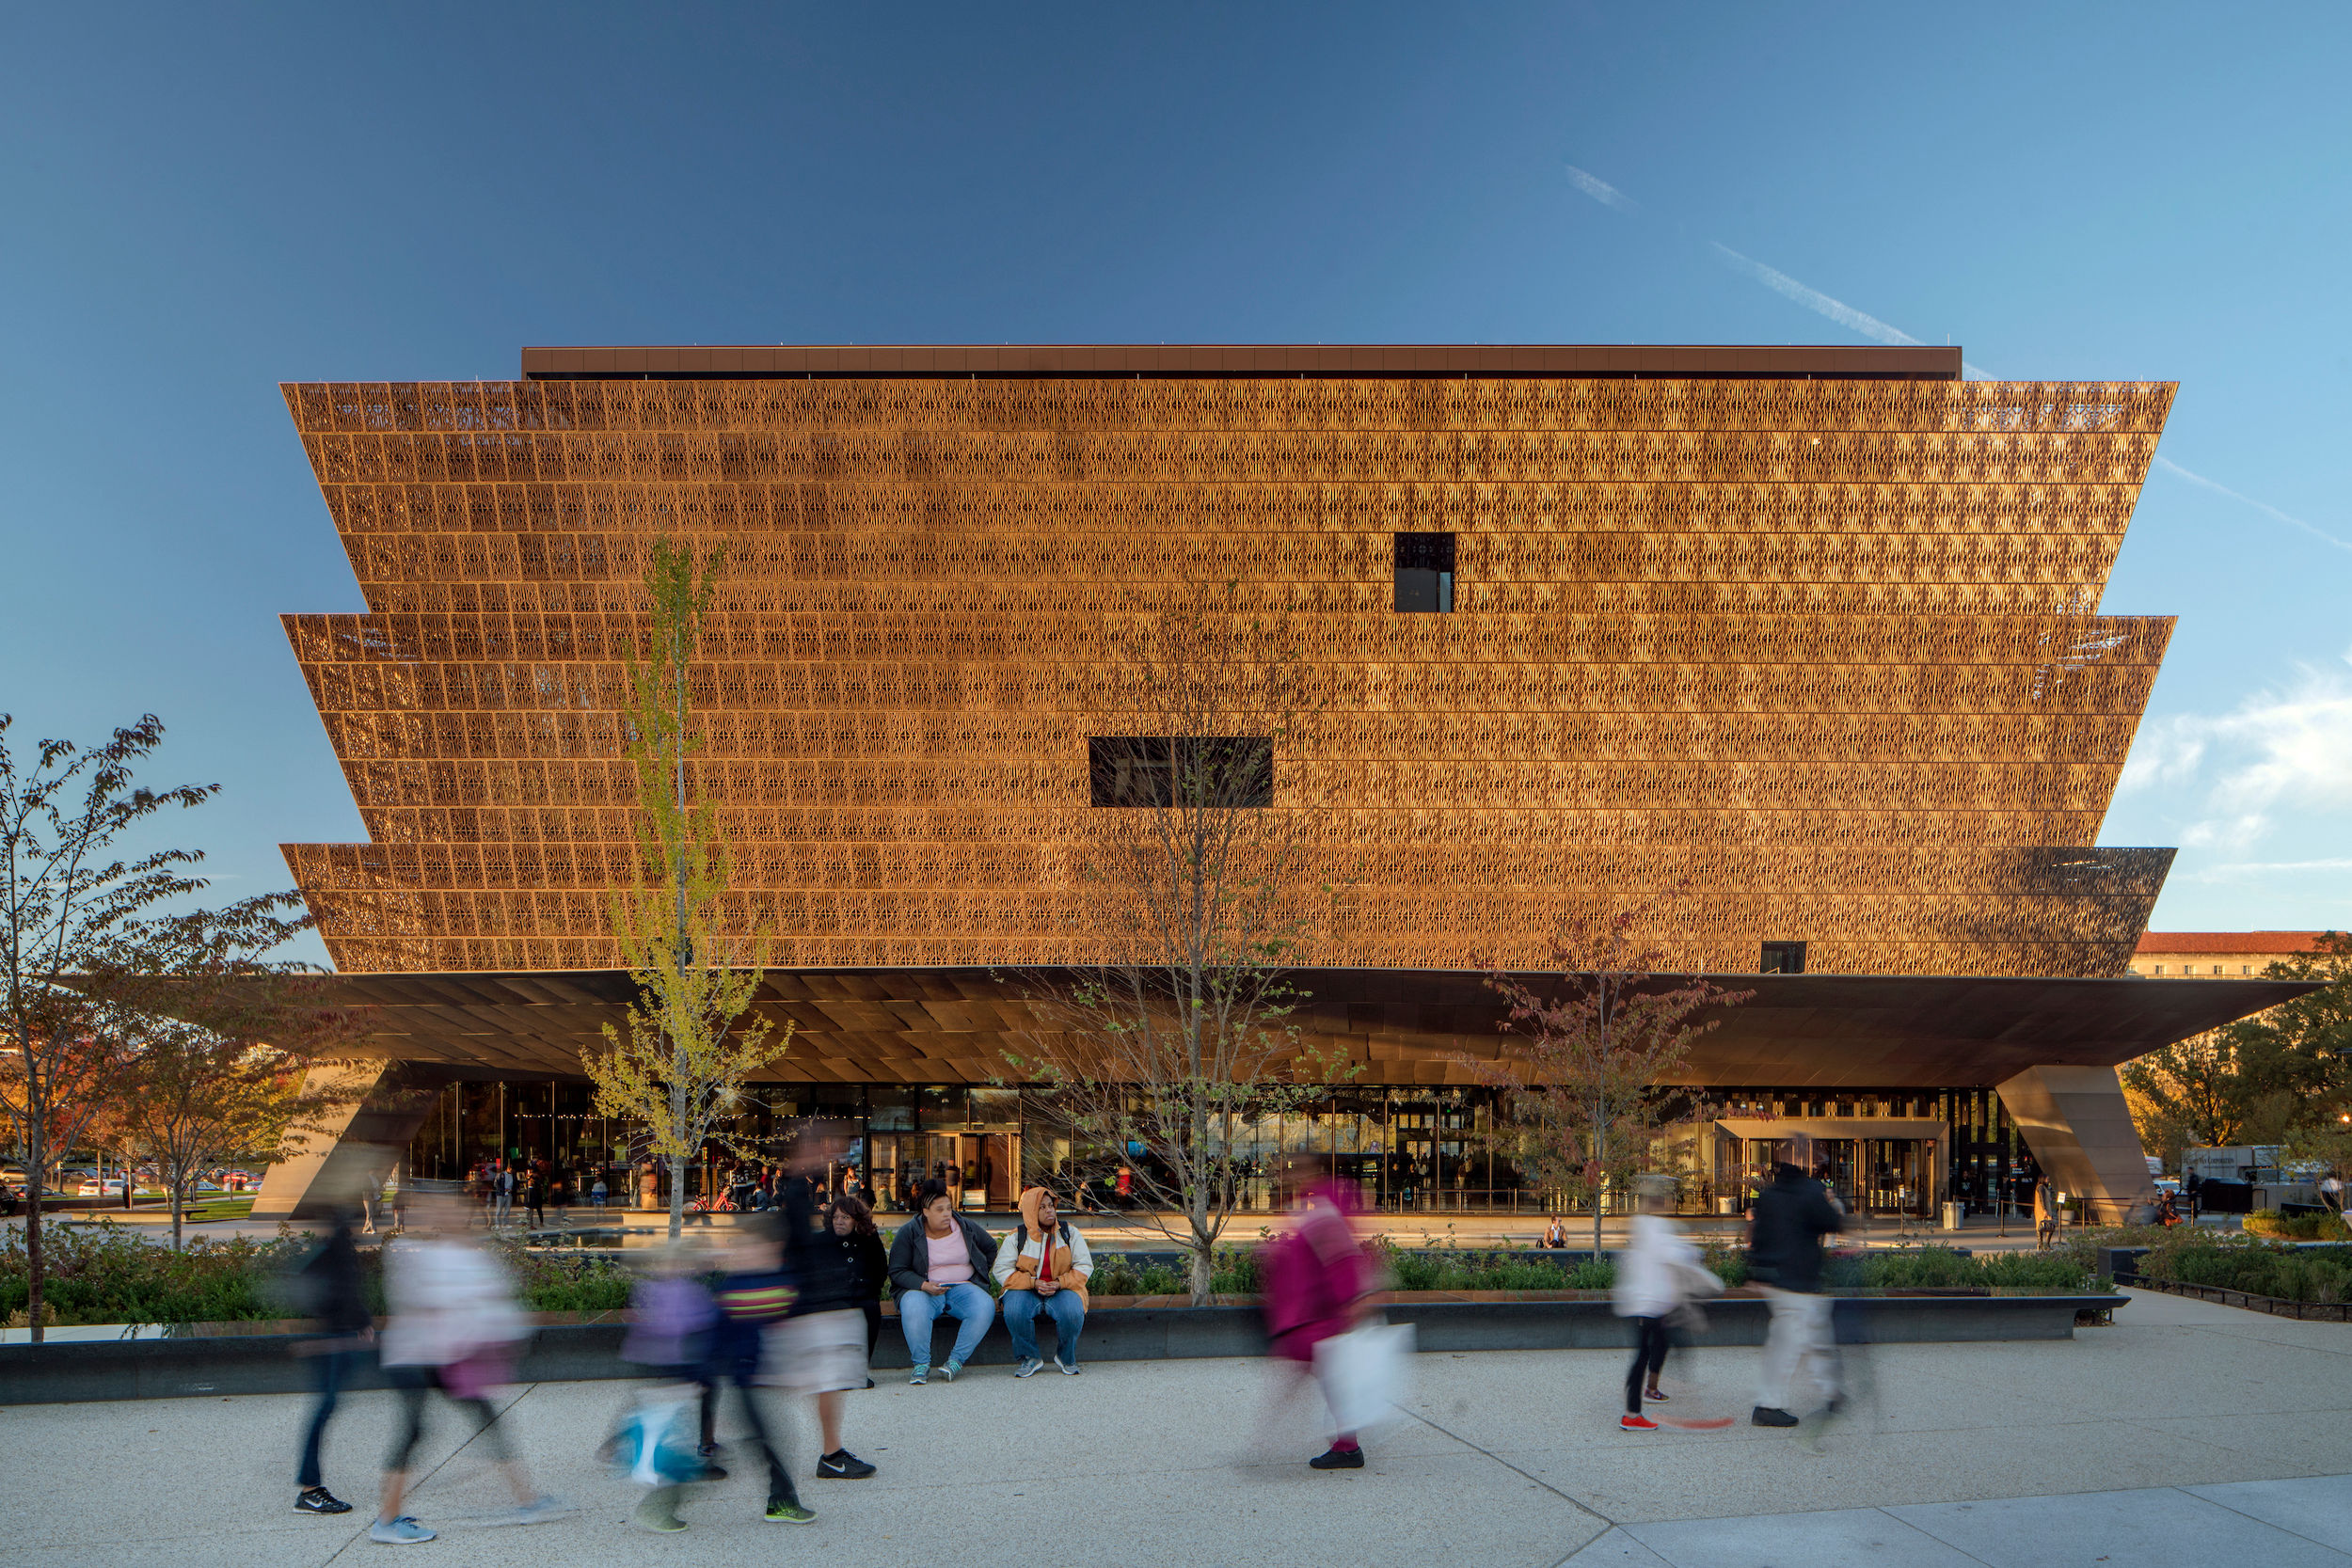 The Smithsonian National Museum of African American History & Culture